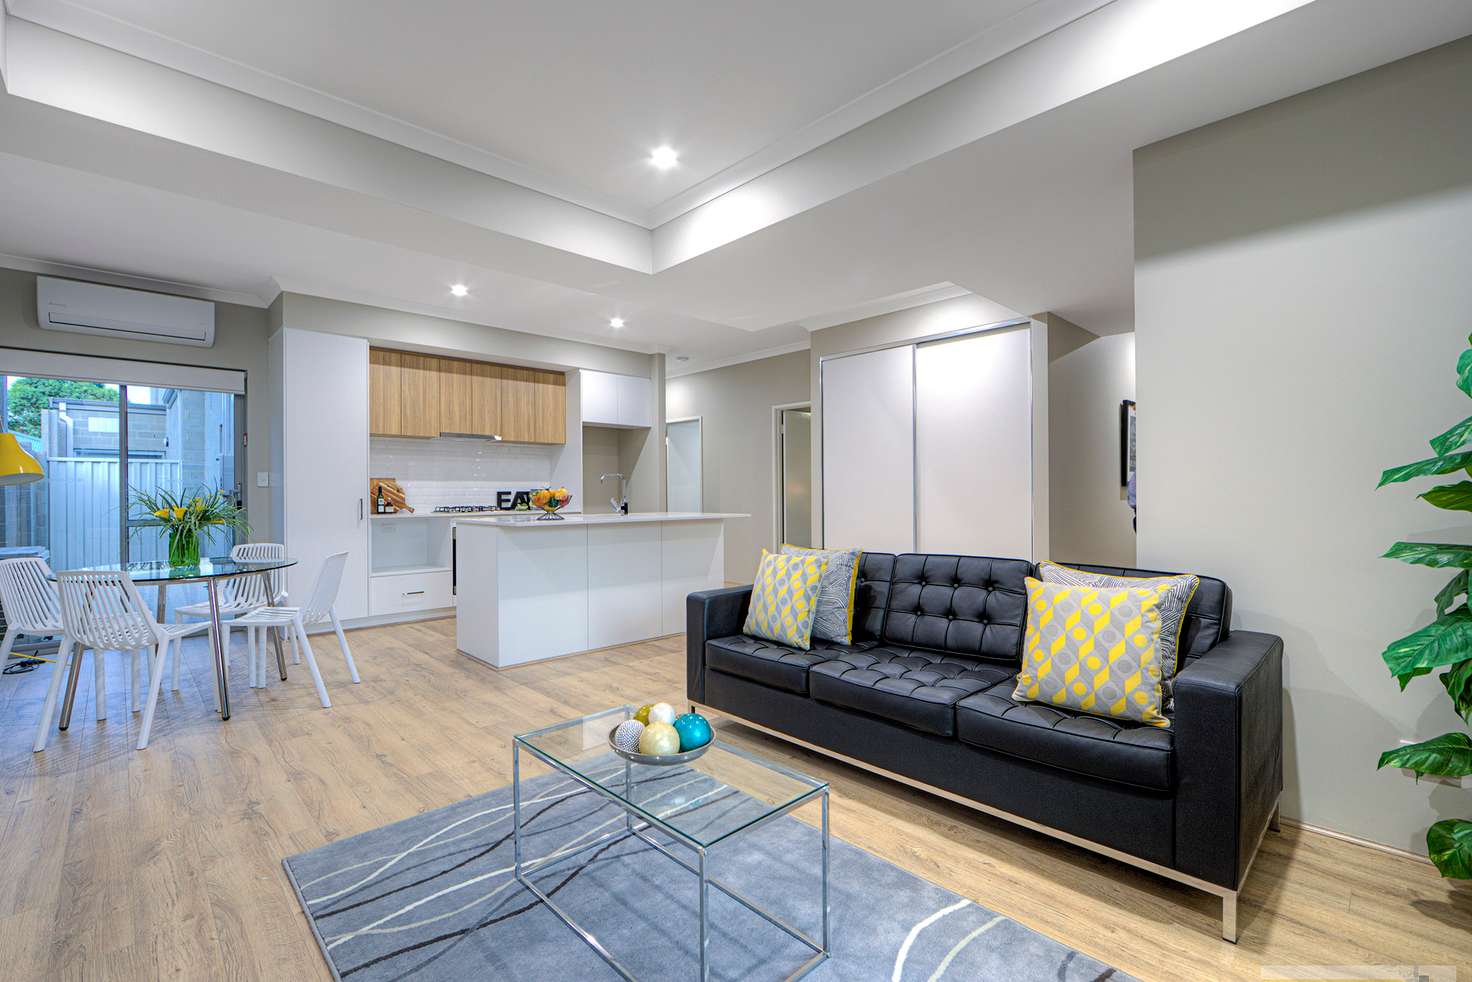 Main view of Homely apartment listing, 53 Gardiner St, Belmont WA 6104